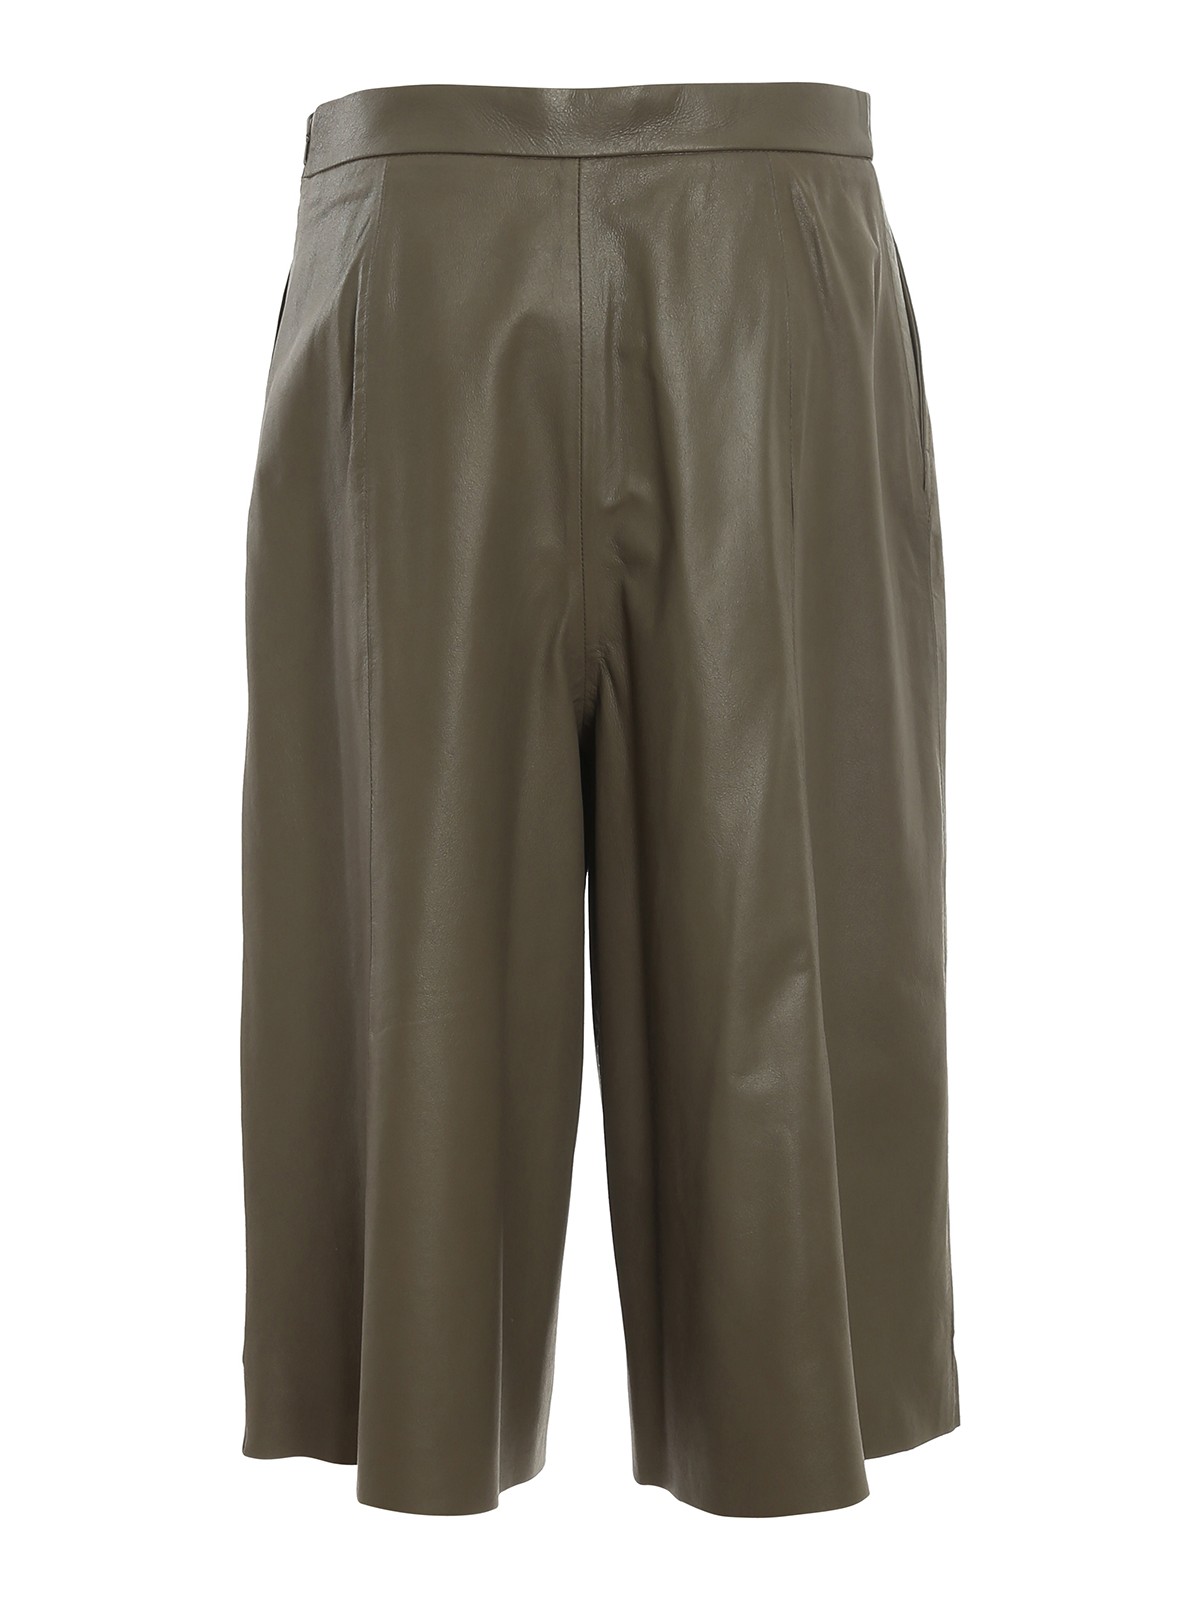 Leather trousers Weekend Max Mara - Cognac trousers - 54010117600001